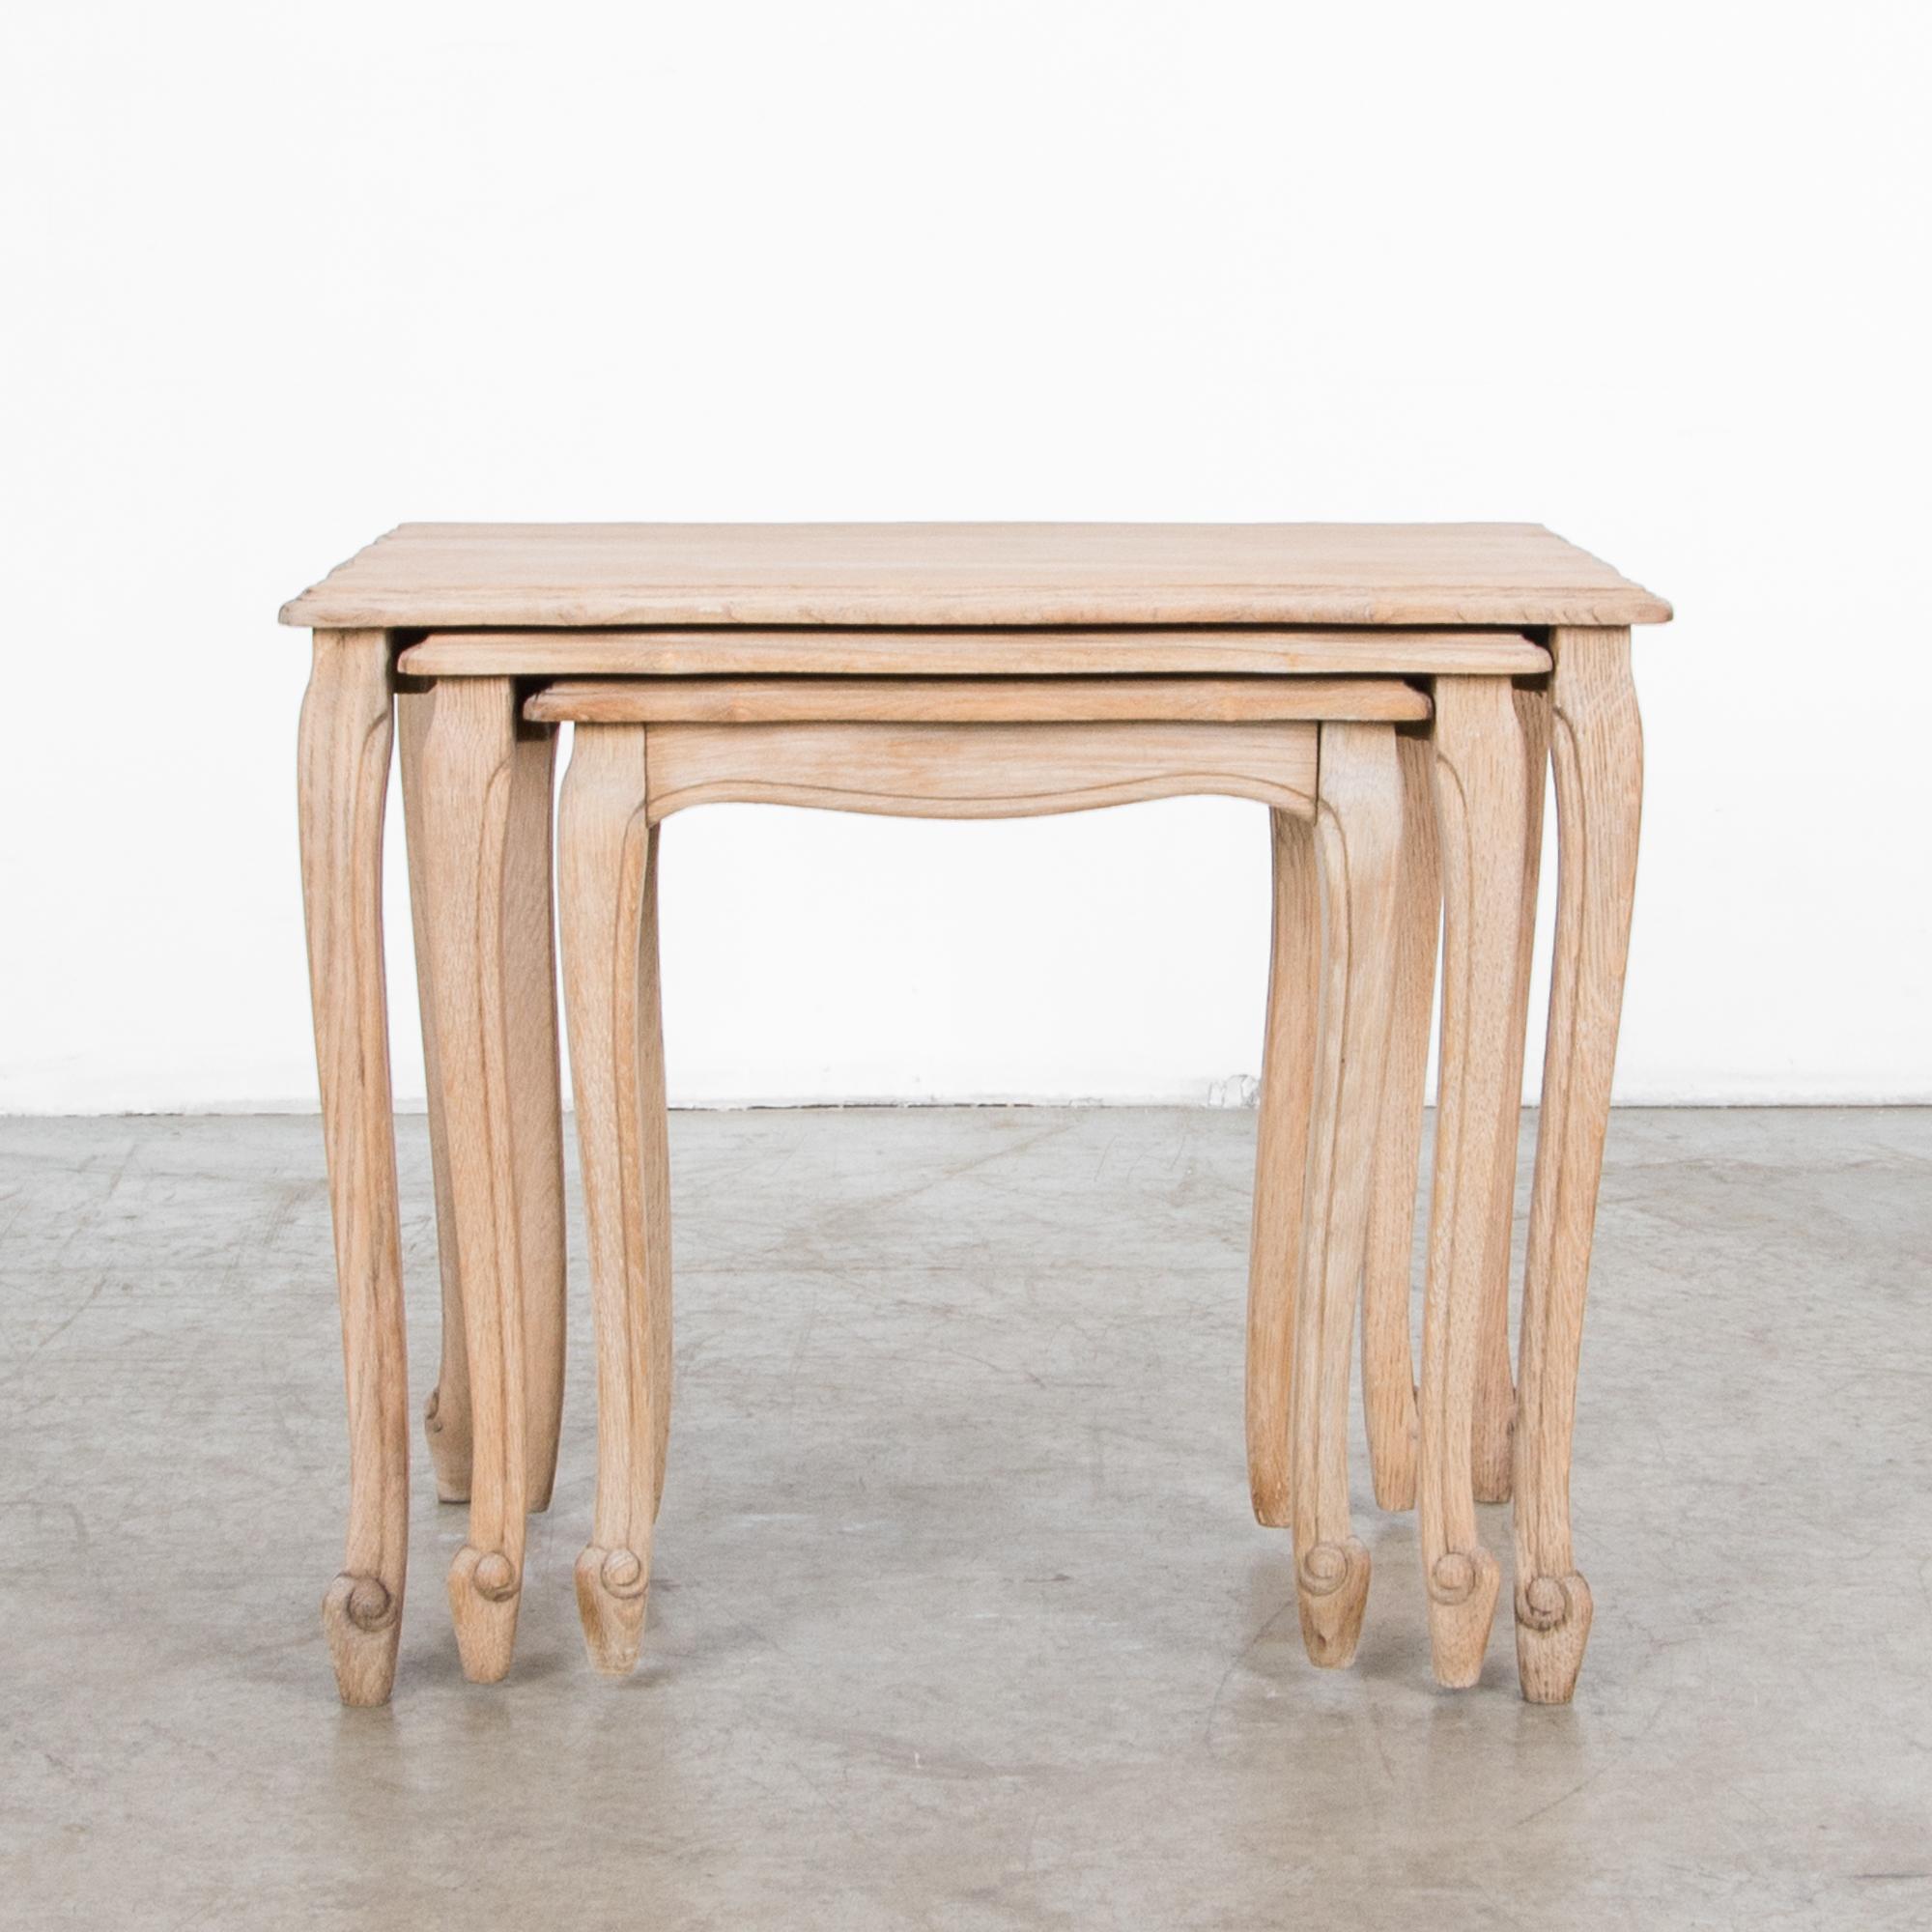 A set of three nesting tables from Belgium, circa 1950. Slender cabriole legs, featuring a subtle scroll, support a tabletop with a scalloped and carved table edge. Made of bleached oak, the understated finish gives these nesting tables a classic